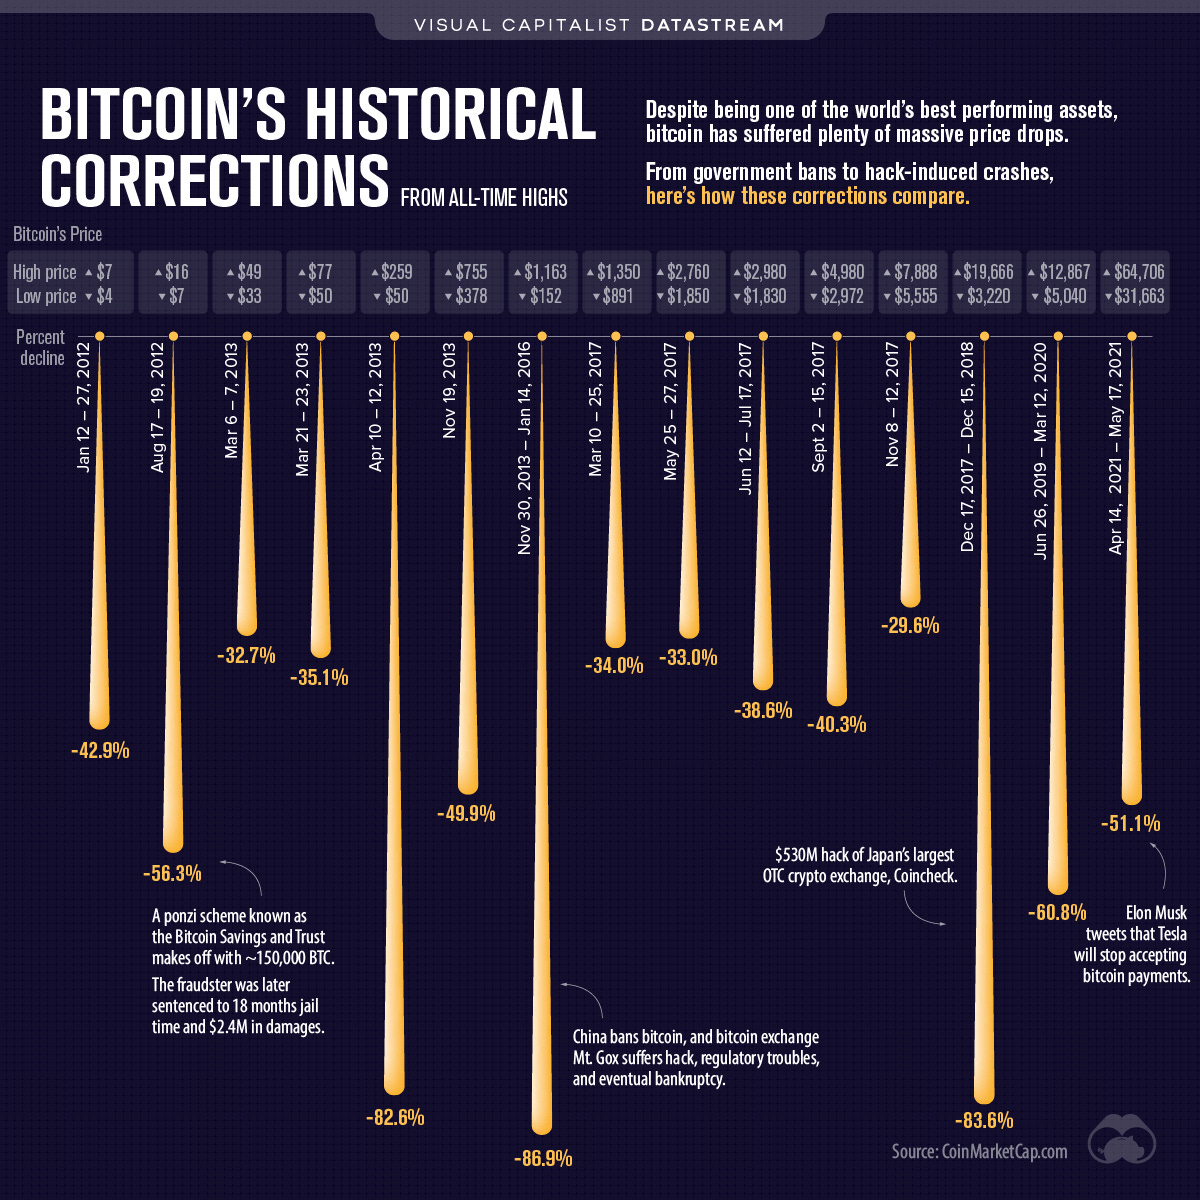 Bitcoin historical corrections from all time highs